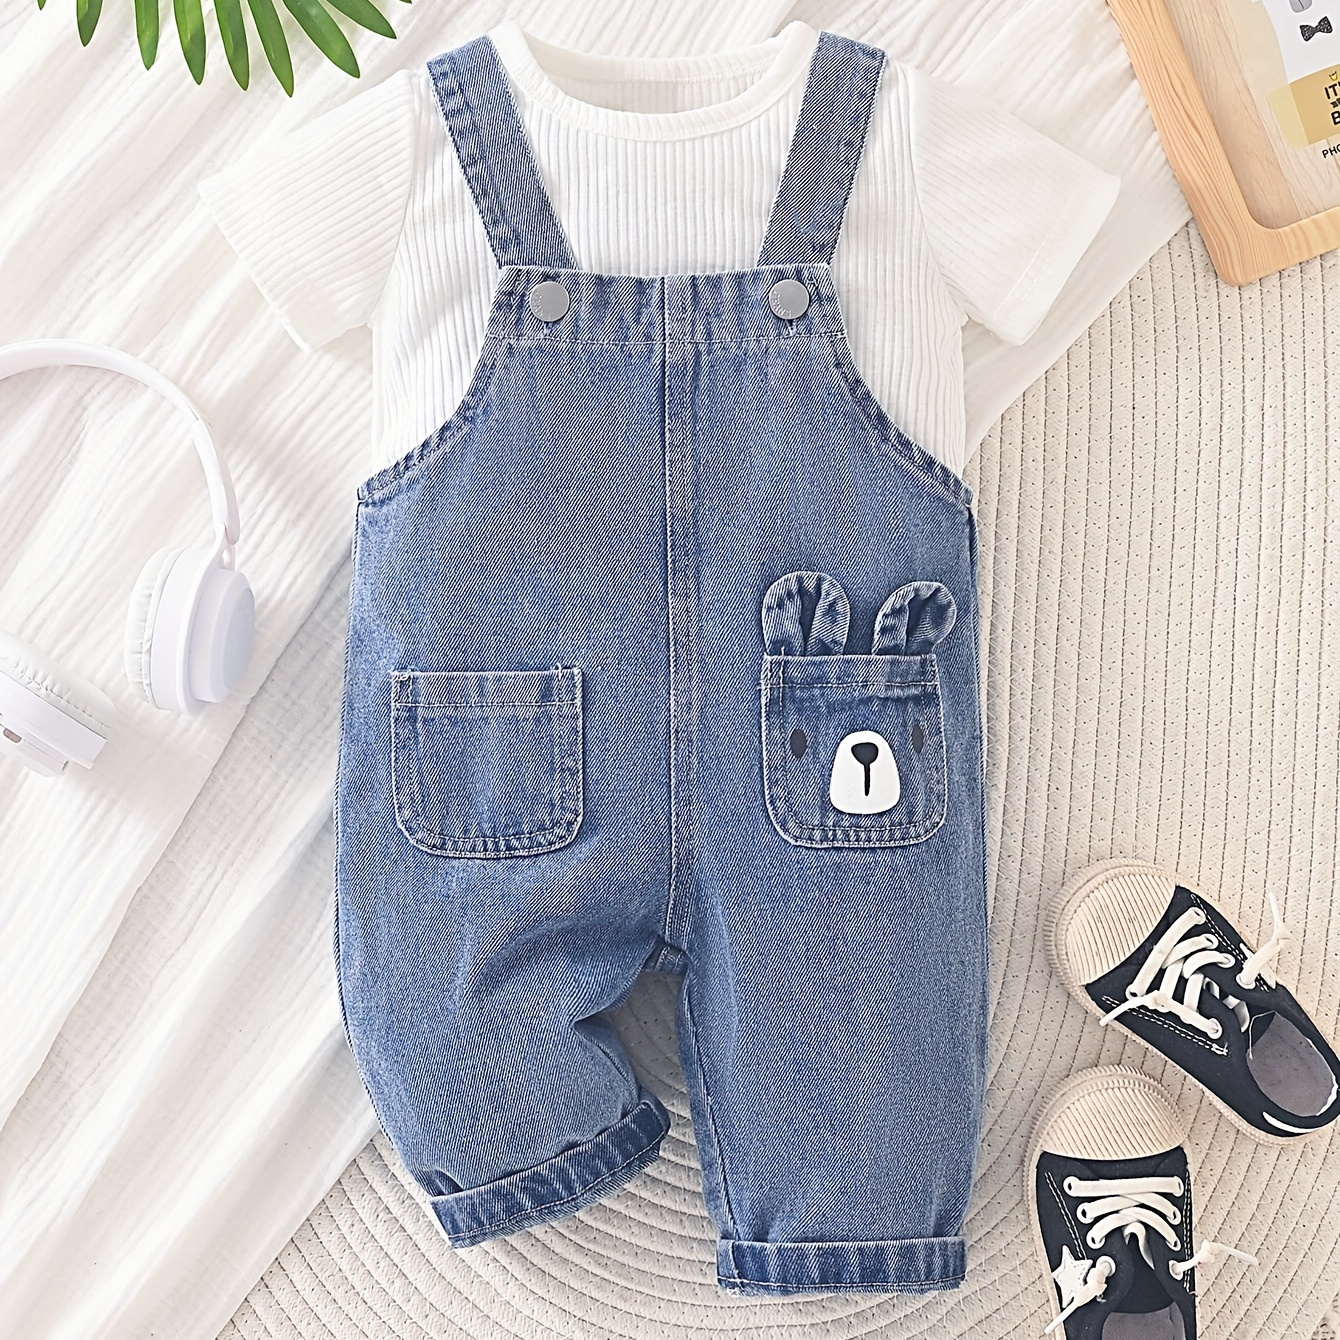 

2pcs Baby's Bear Print Denim Overalls & Casual Ribbed Short-sleeve Top, Toddler & Infant Boy's Clothing Set For Spring Summer